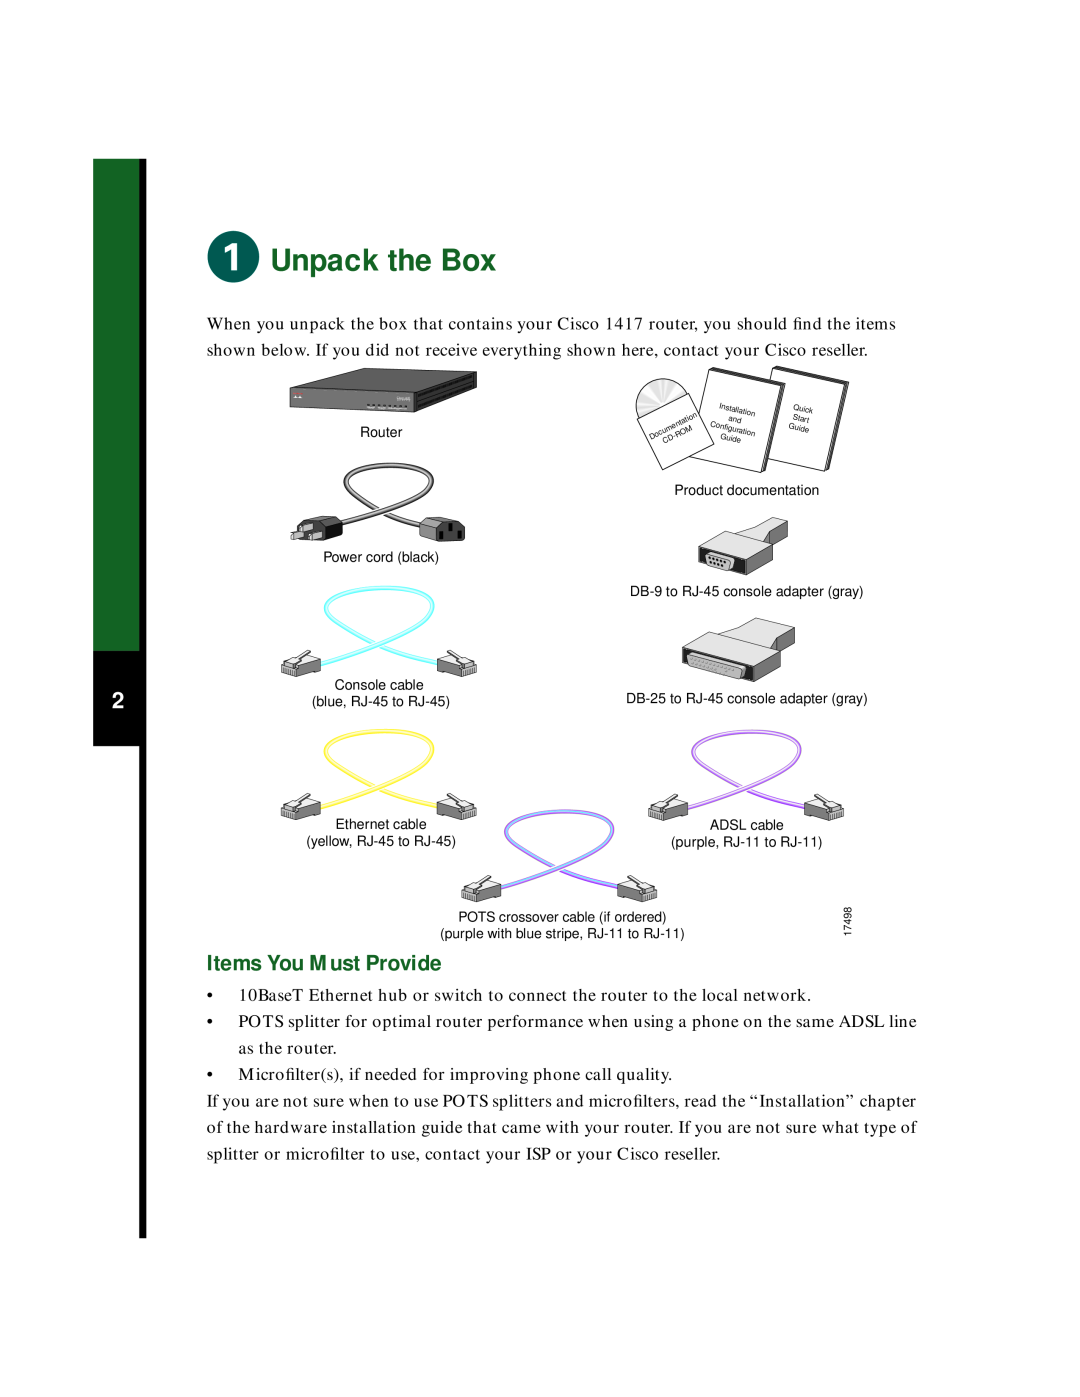 Cisco Systems 1417 quick start Unpack the Box, Items You Must Provide 